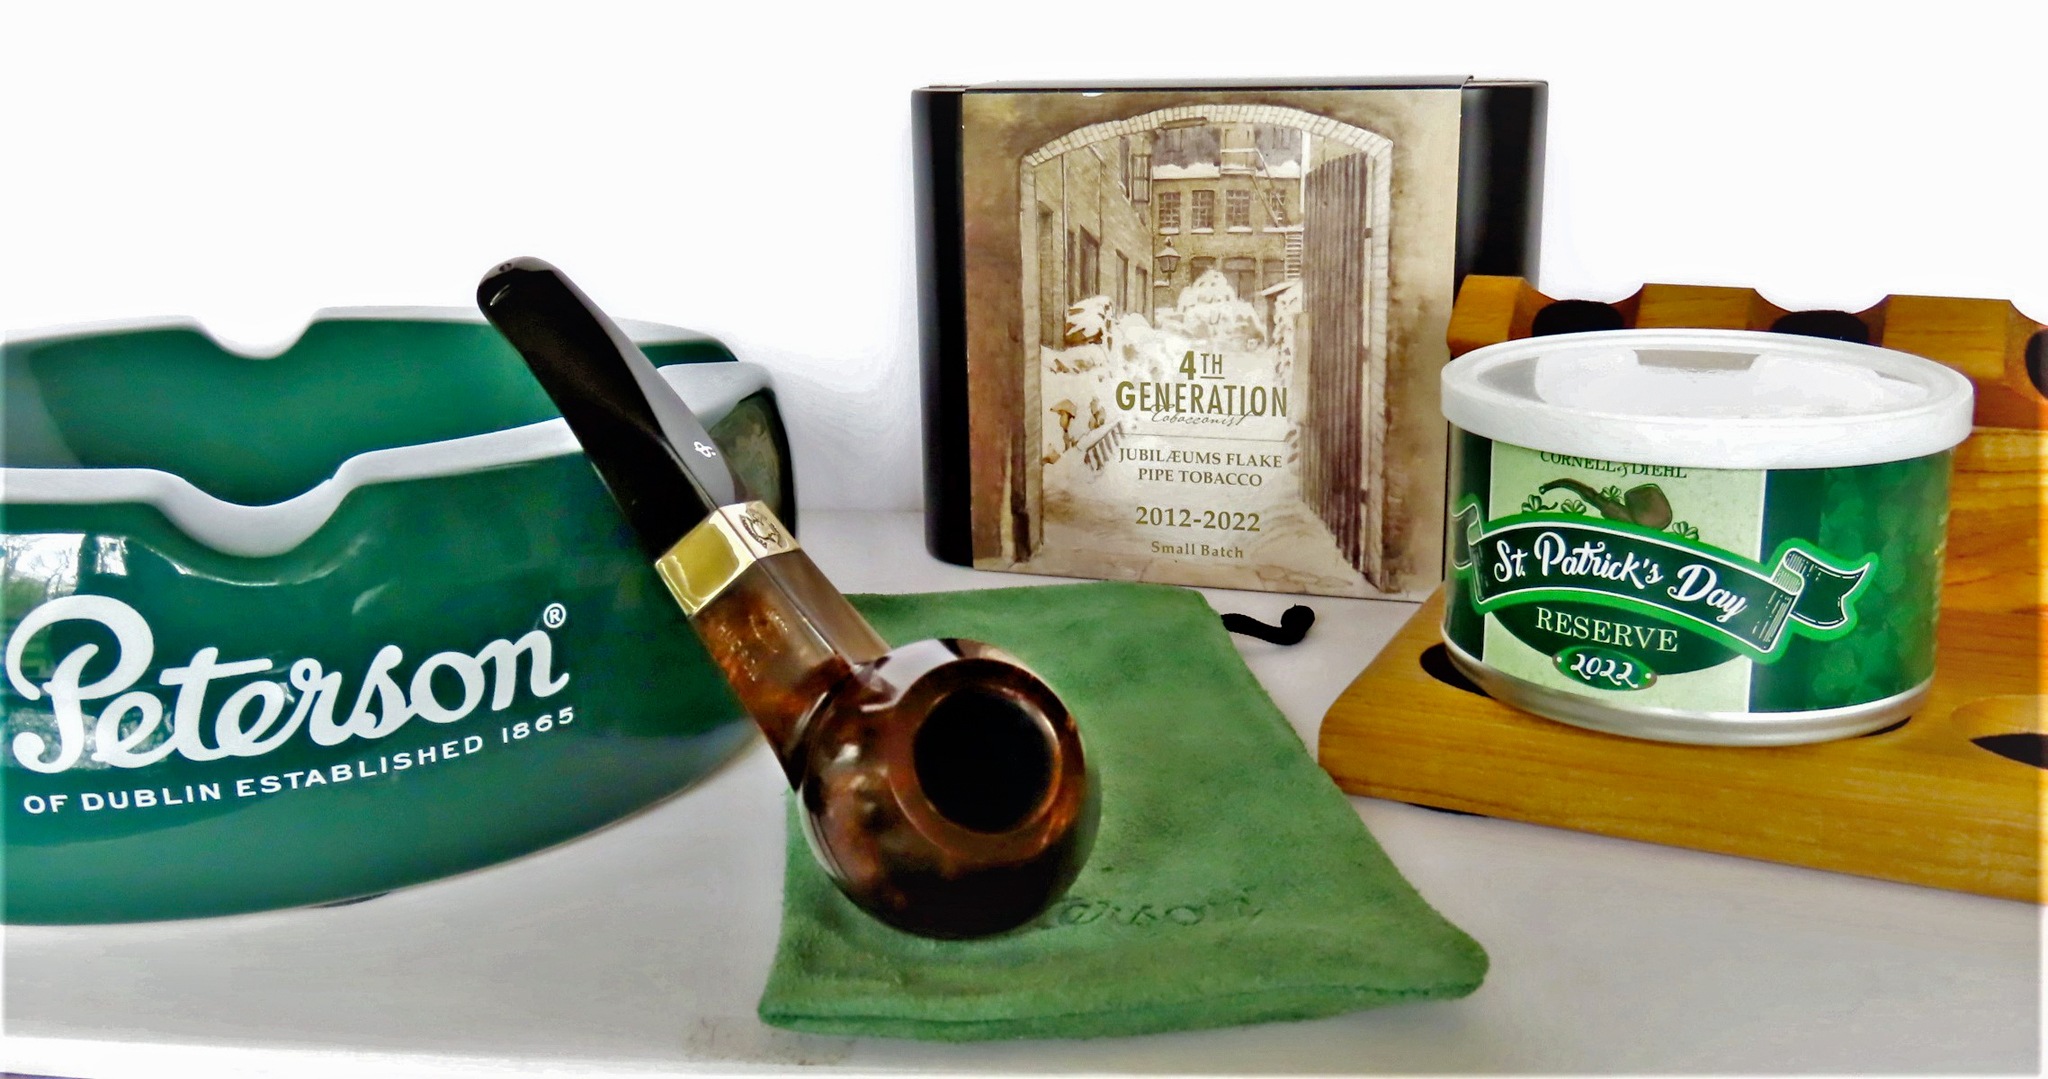 Sherlock Holmes Smooth Dark Stained Hudson is center stage. It came with Cornell& Diehl's St. Patrick's Day Special Reserve 2022 small batch blend of Bright Virginias, hazelnut, vanilla, a variety of canvendish and a smooth creamy topping. A lovely blend. In the background is 2021/2022 4th Generation limited edition Jubilaeums Flake, a tobacco blend dedicated to Erik Stokkebye's grandfather, Erik Poul. Photo by Fred Brown